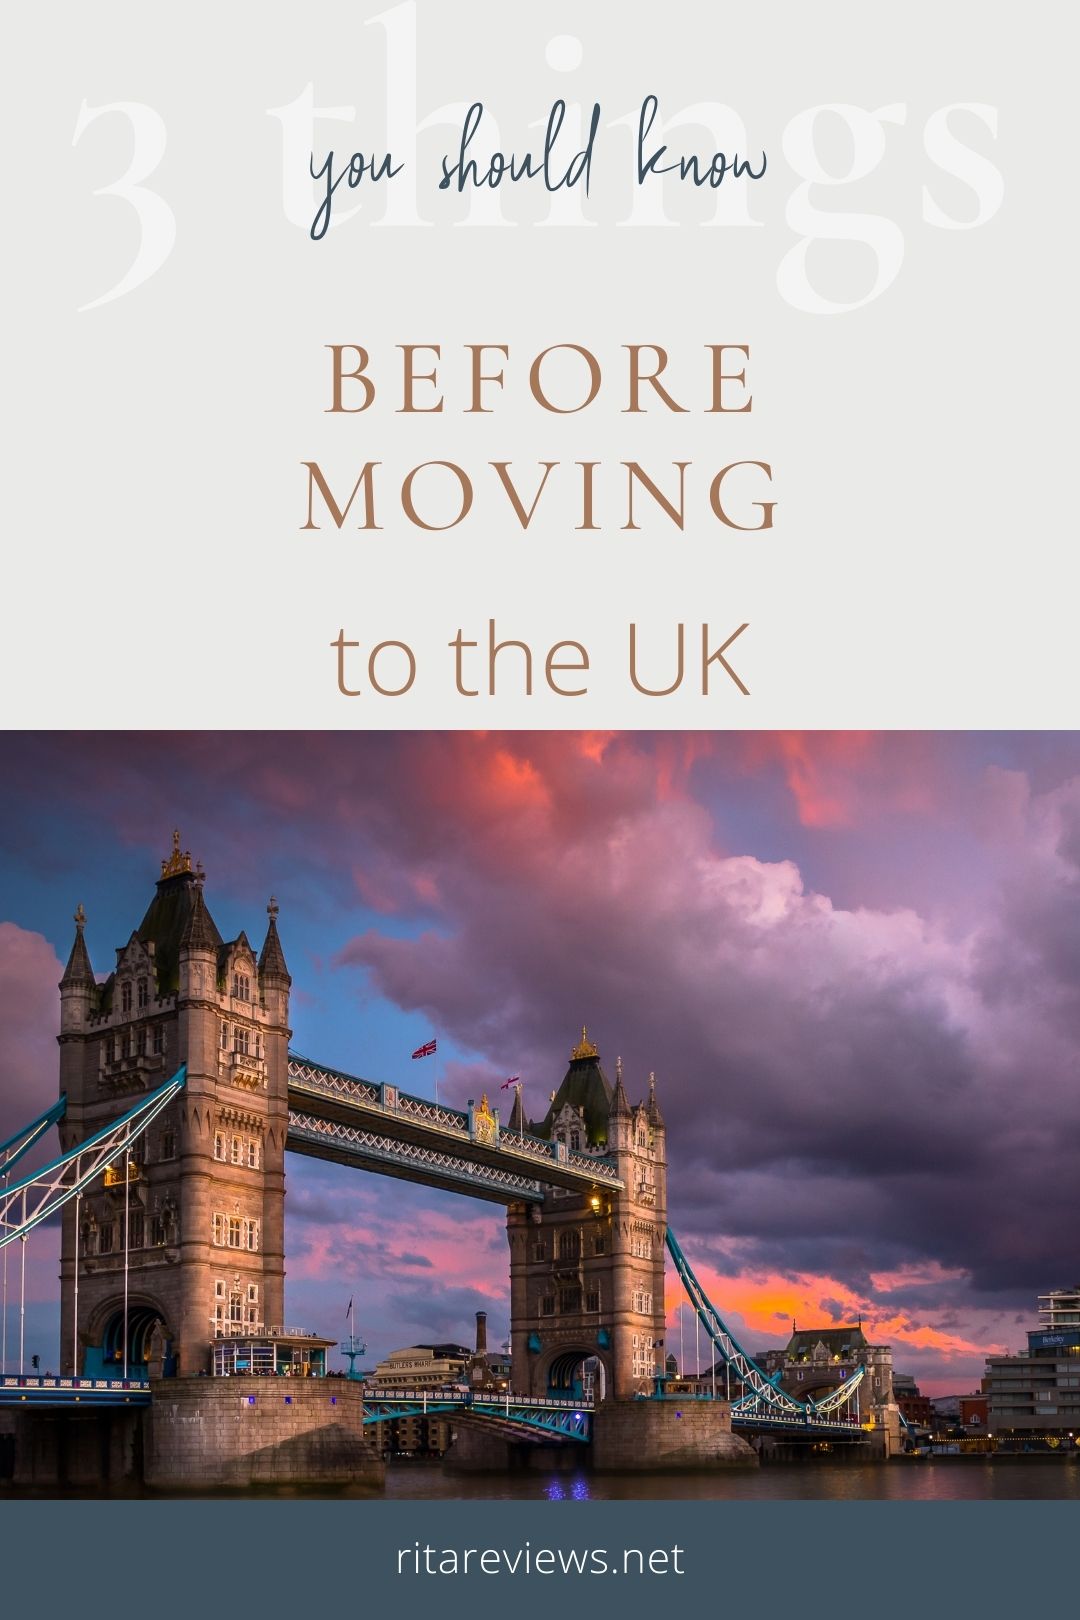 3 Things You Should Know Before Moving To The UK